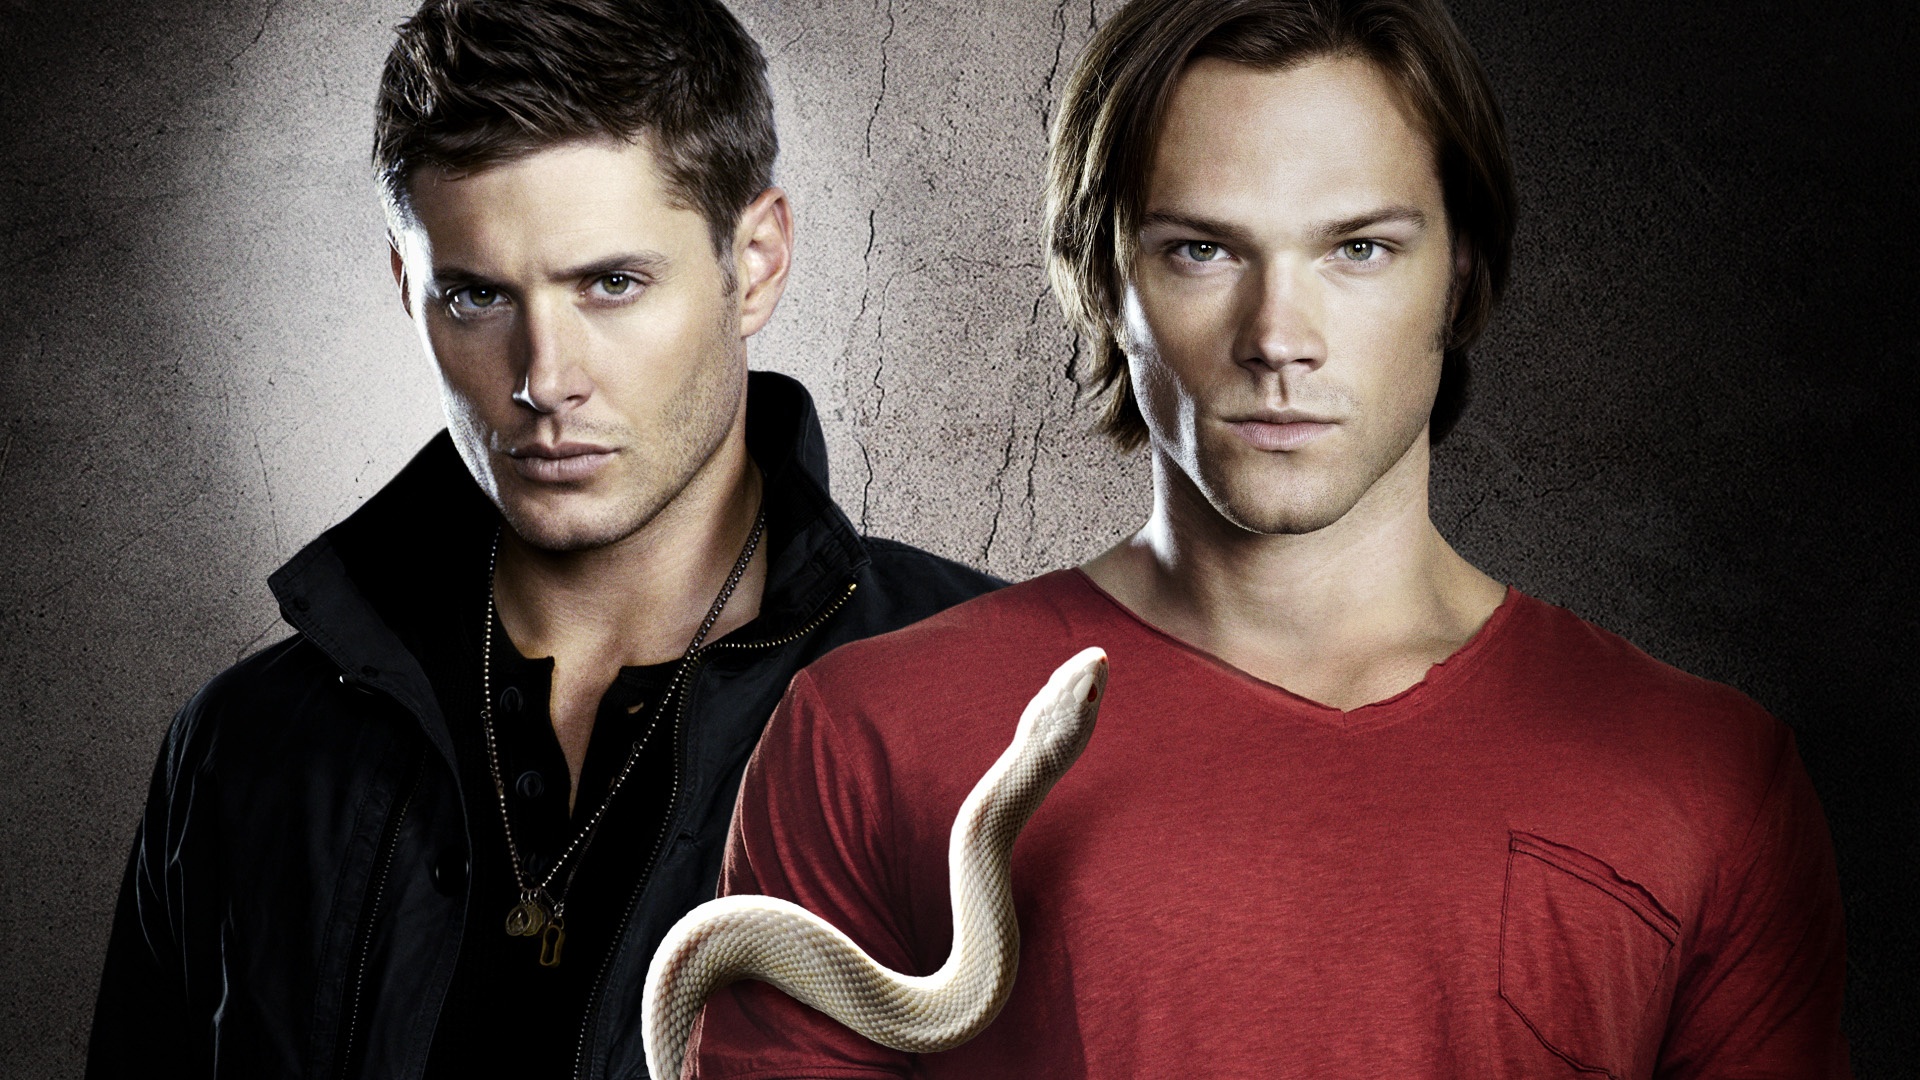 Supernatural Wallpapers Pictures Images